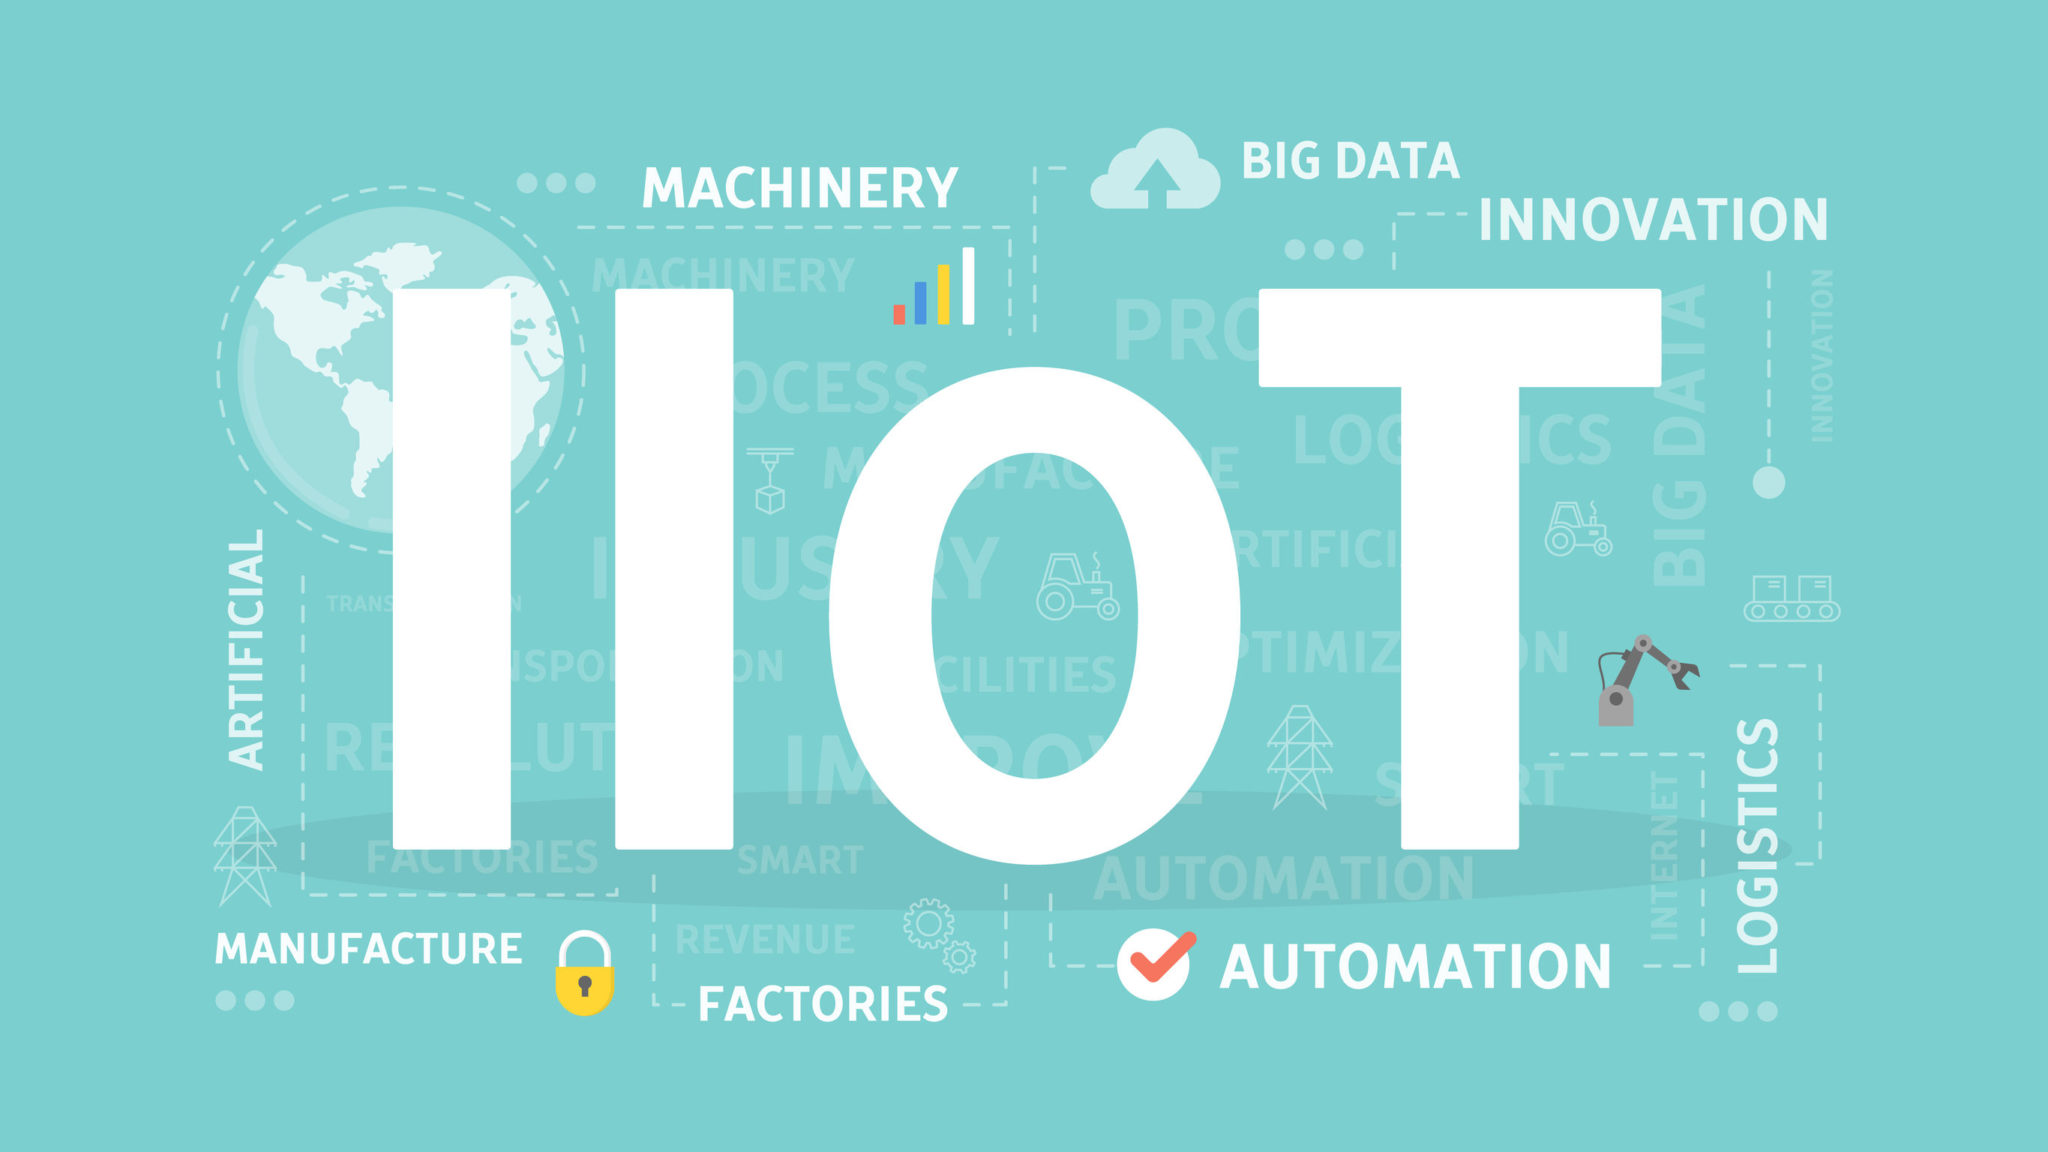 IIoT is a Must for Small Manufacturers Looking to be Acquired